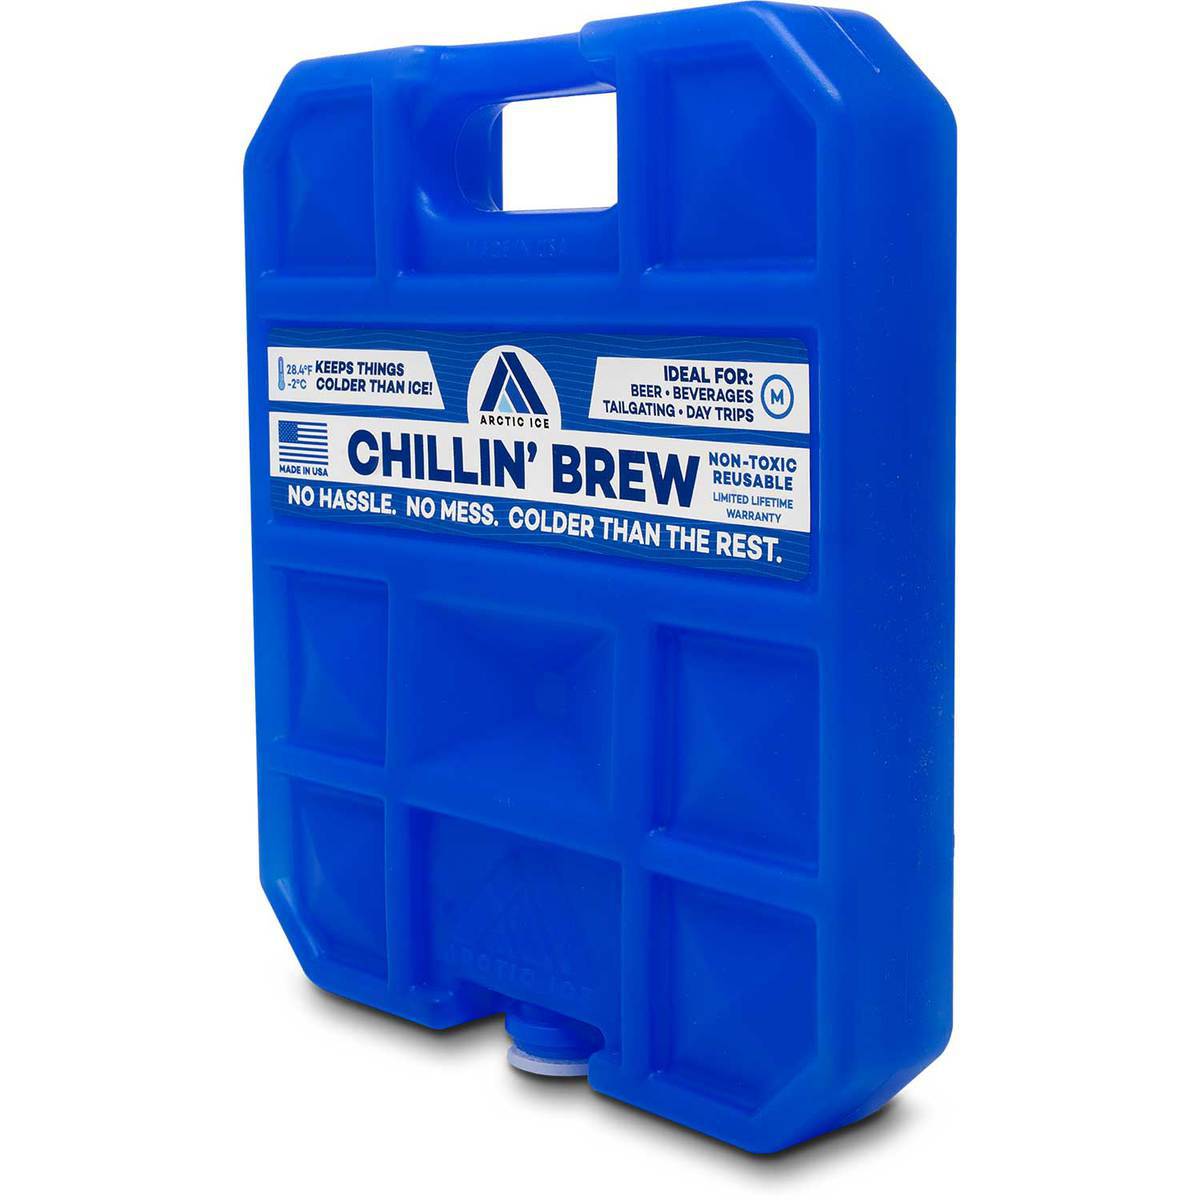 Arctic ICE Chillin' Brew Series, Long Lasting Reusable Ice Pack, Blue Large